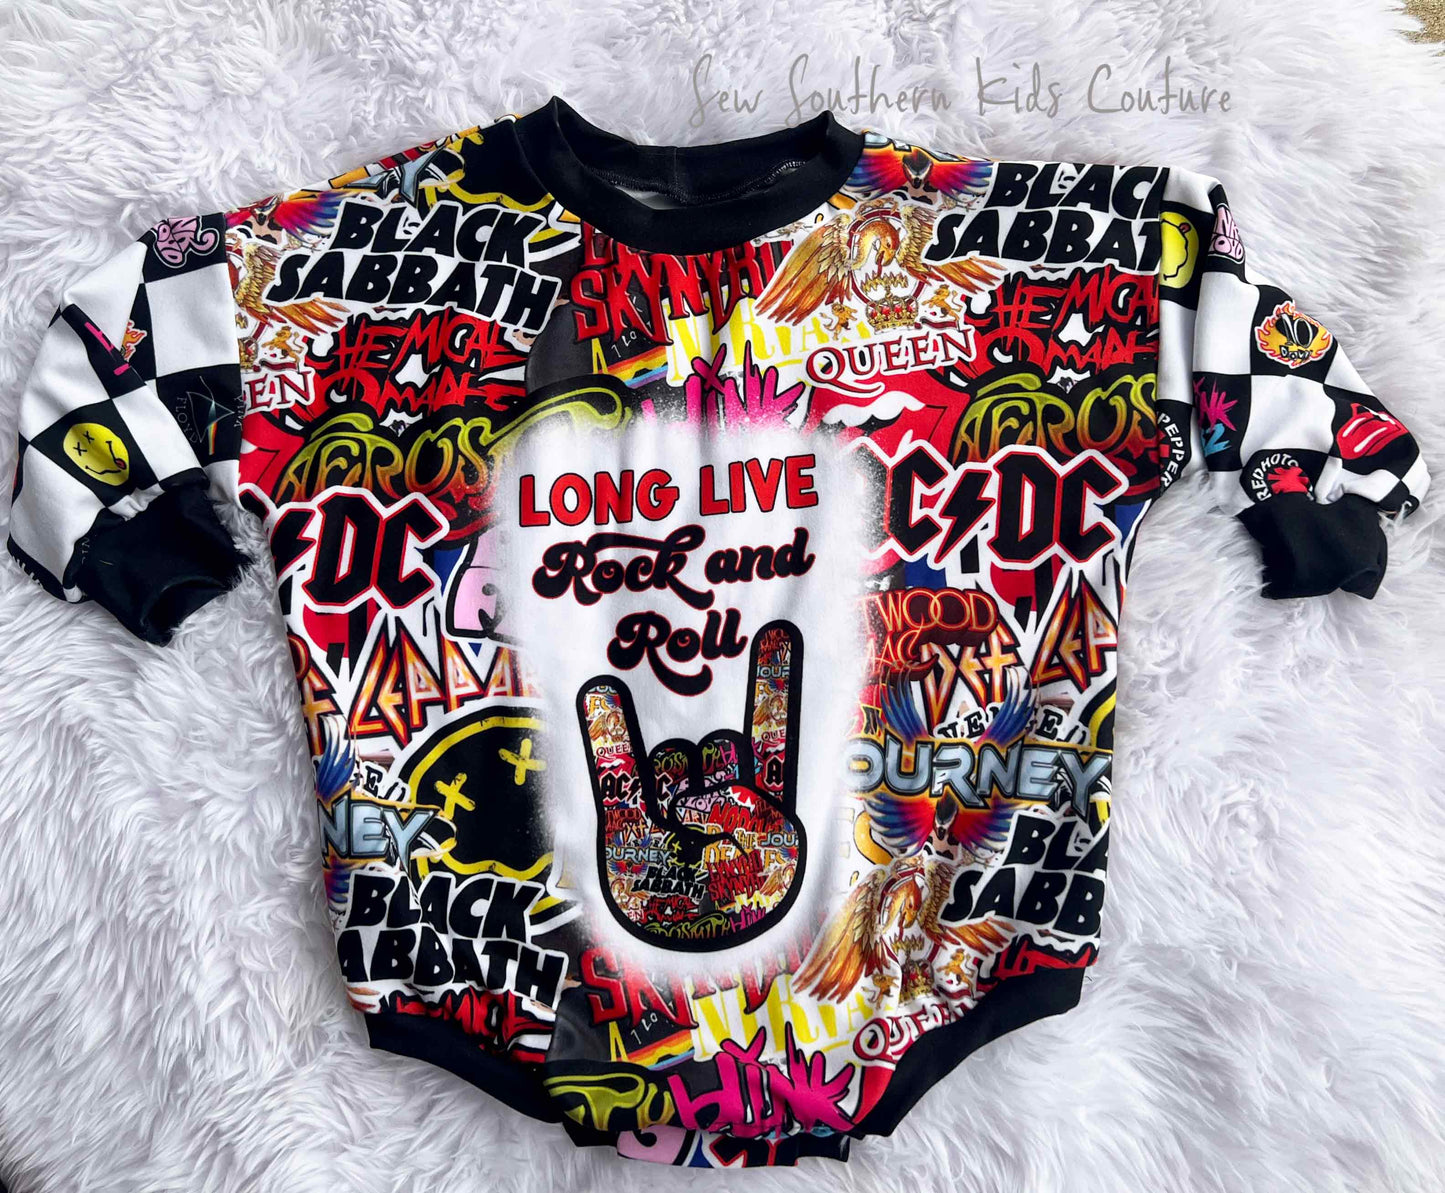 Long Live Rock and Roll Sweater Romper Gender Neutral Bubble Romper